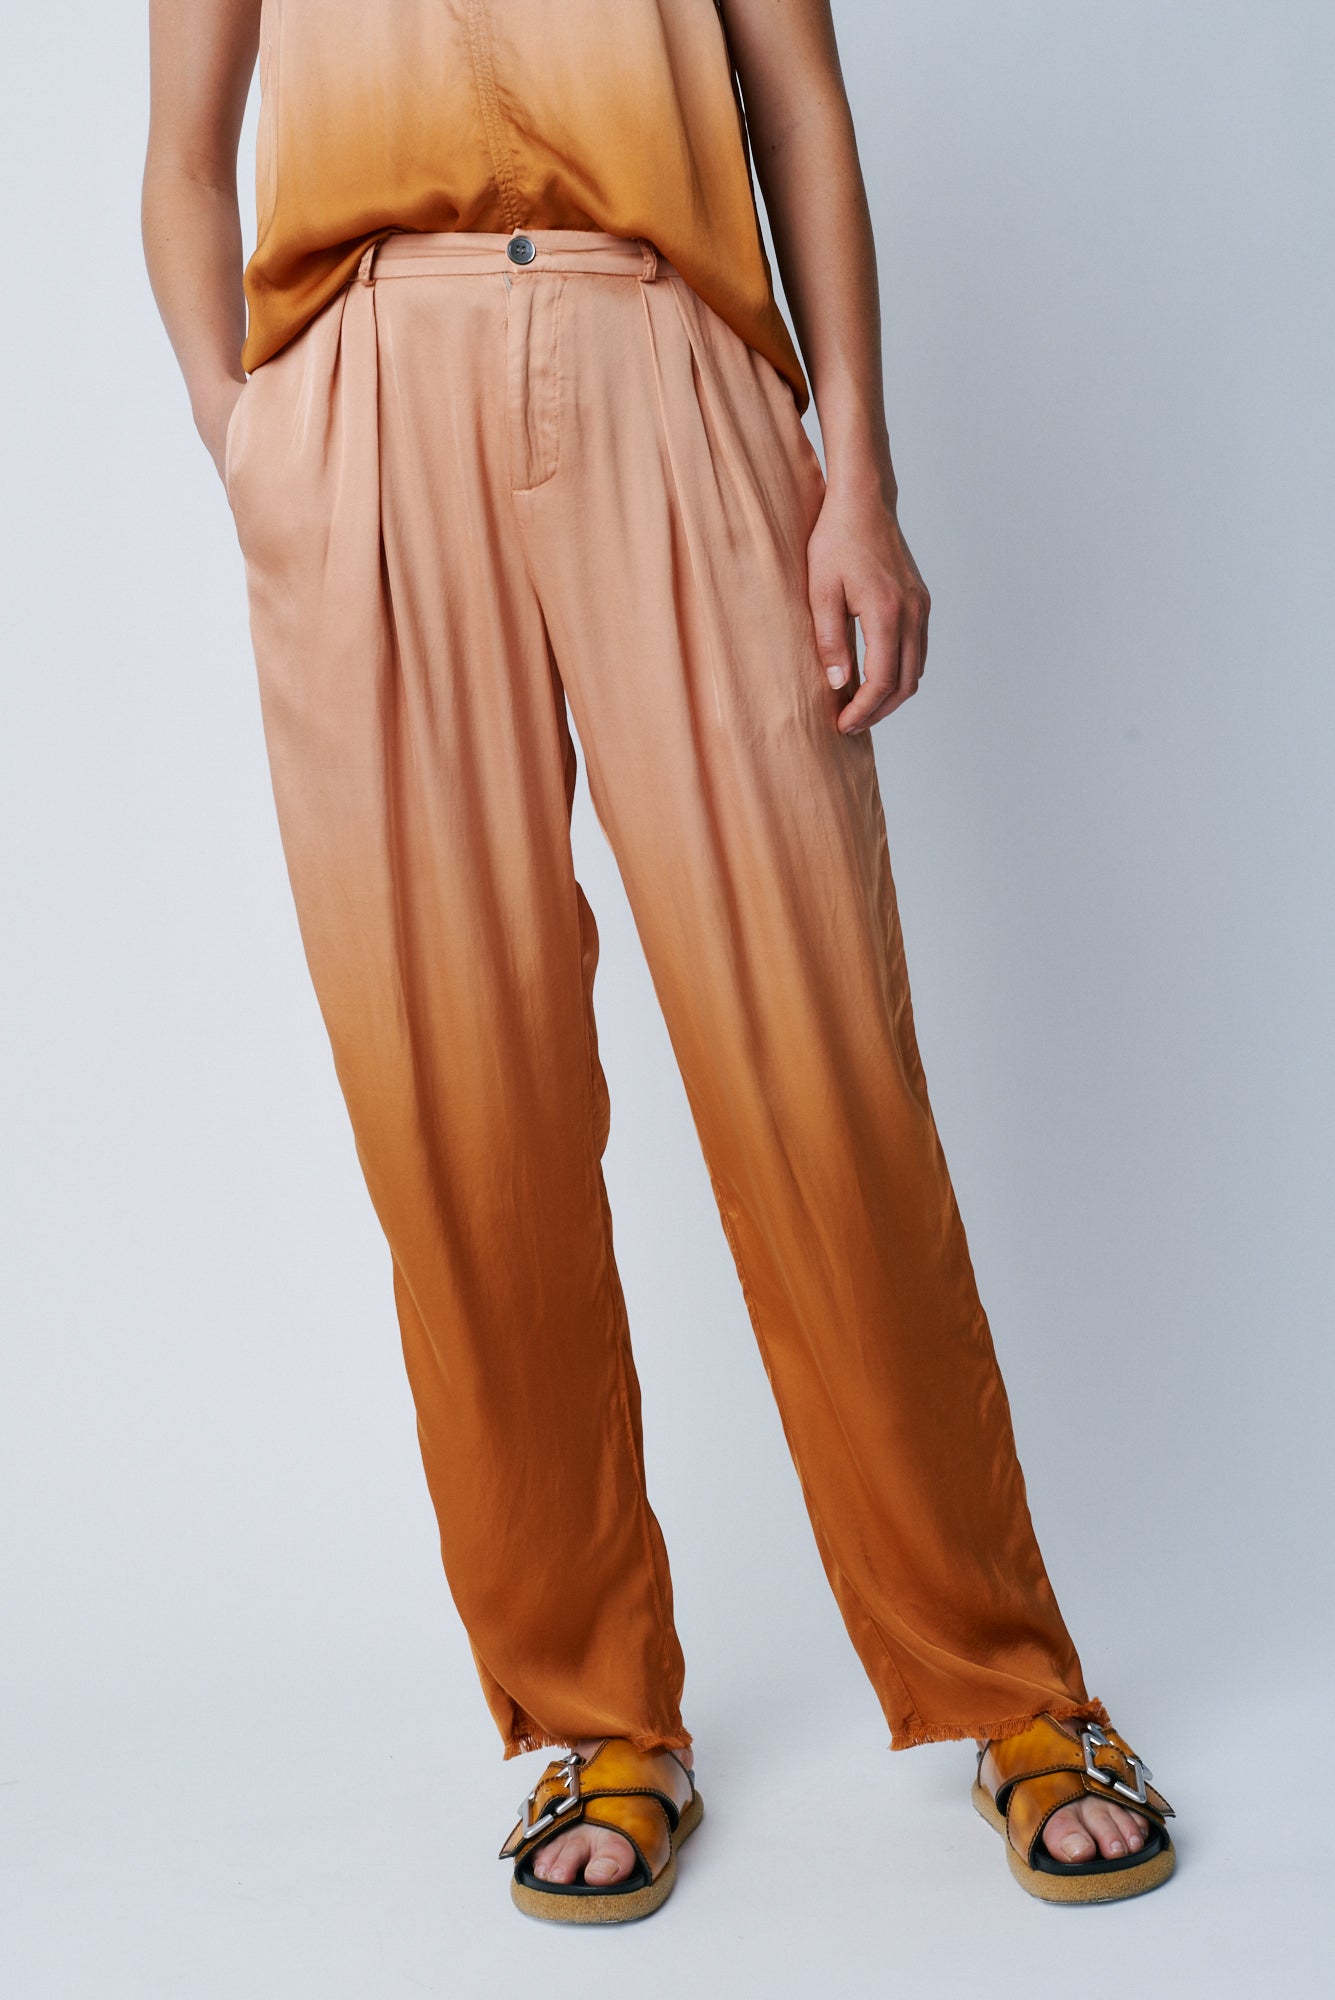 Bengal Dip Dye Matte Satin Pleated Trouser Front Close-Up View